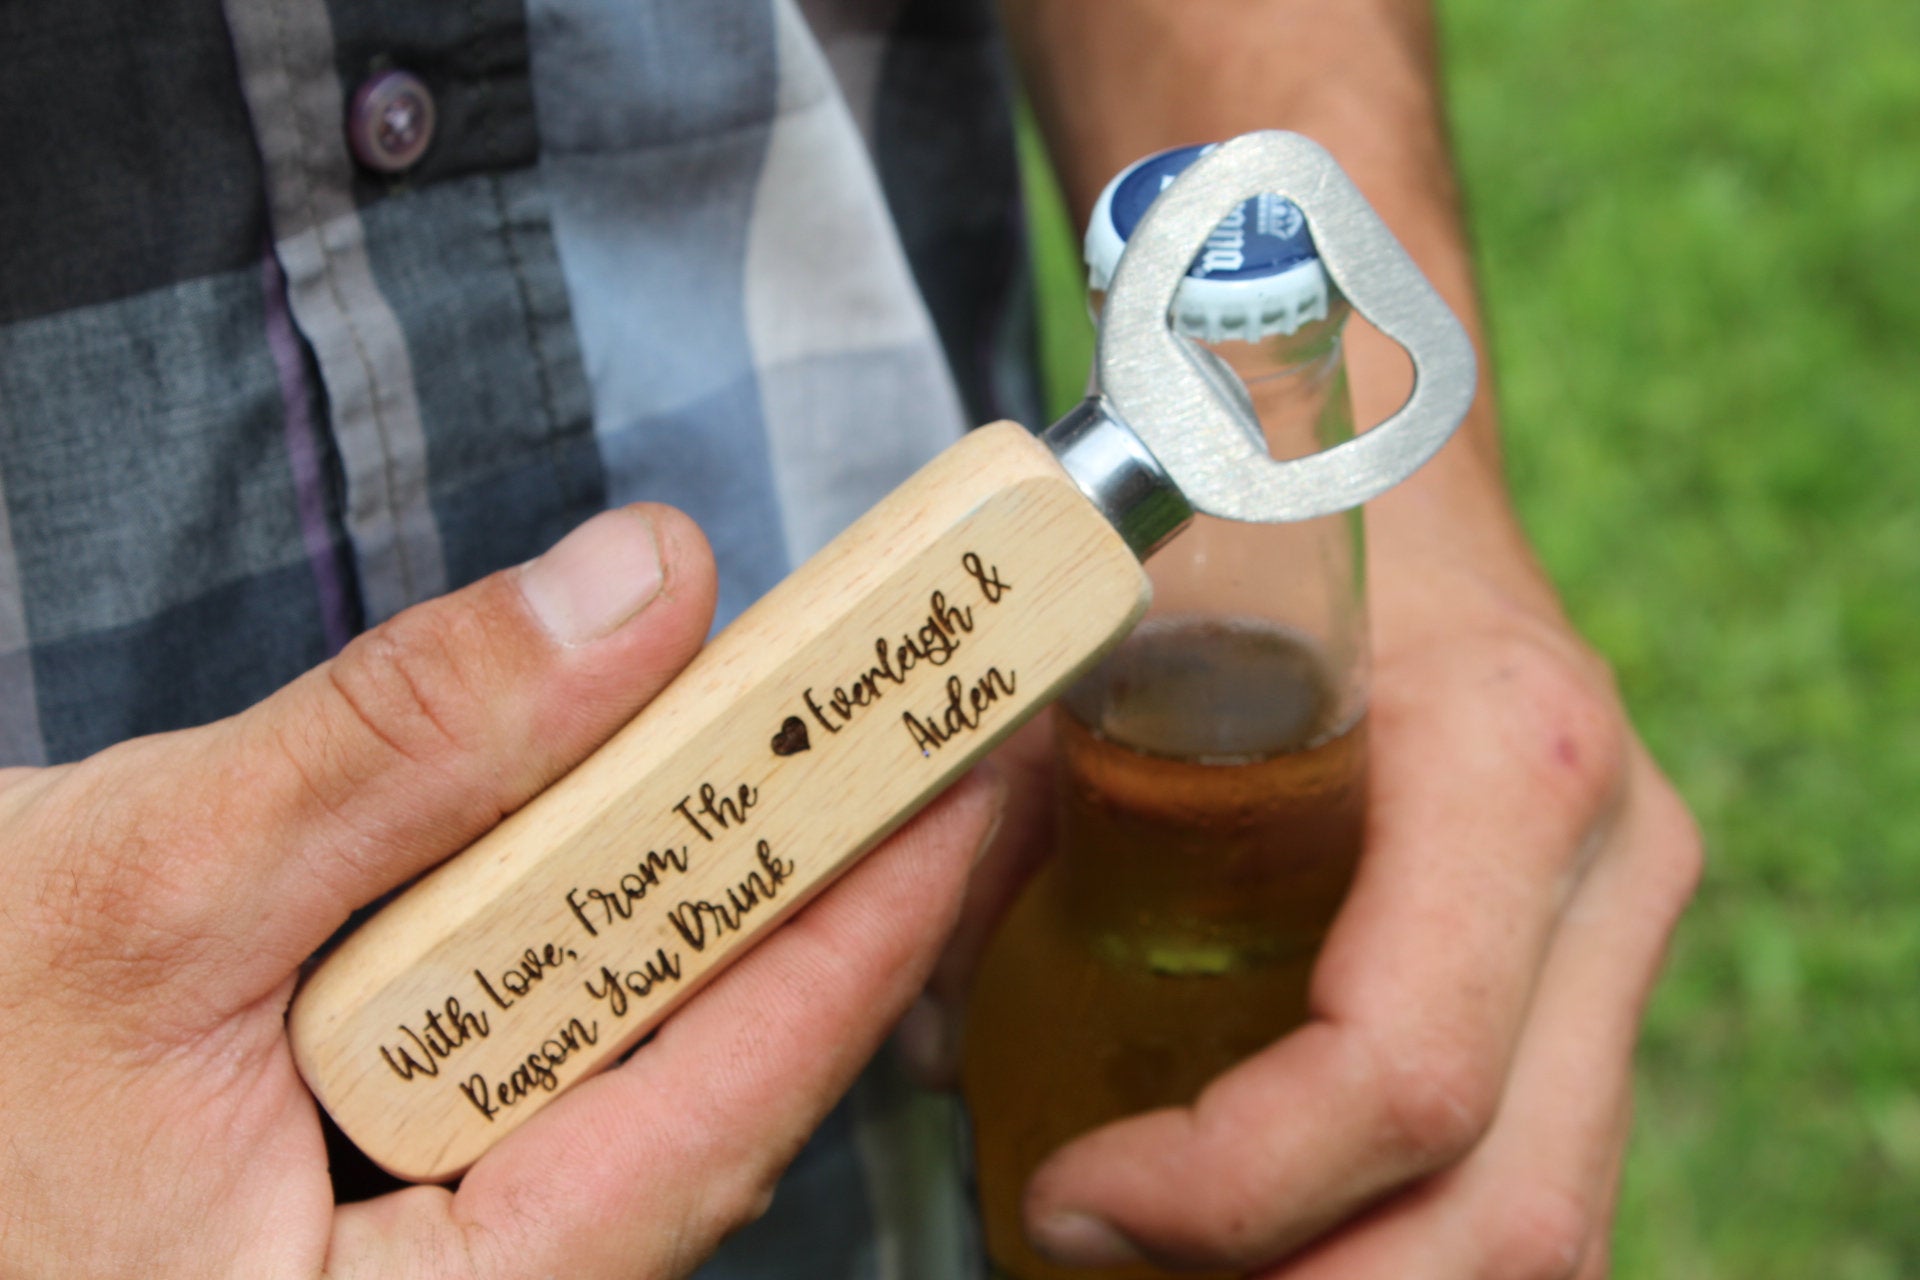 Happy Fathers Day From The Reasons You Drink Personalized Bottle Opener Gift For Dad, Funny Personalized Fathers Day Beer Gift Idea For Dad